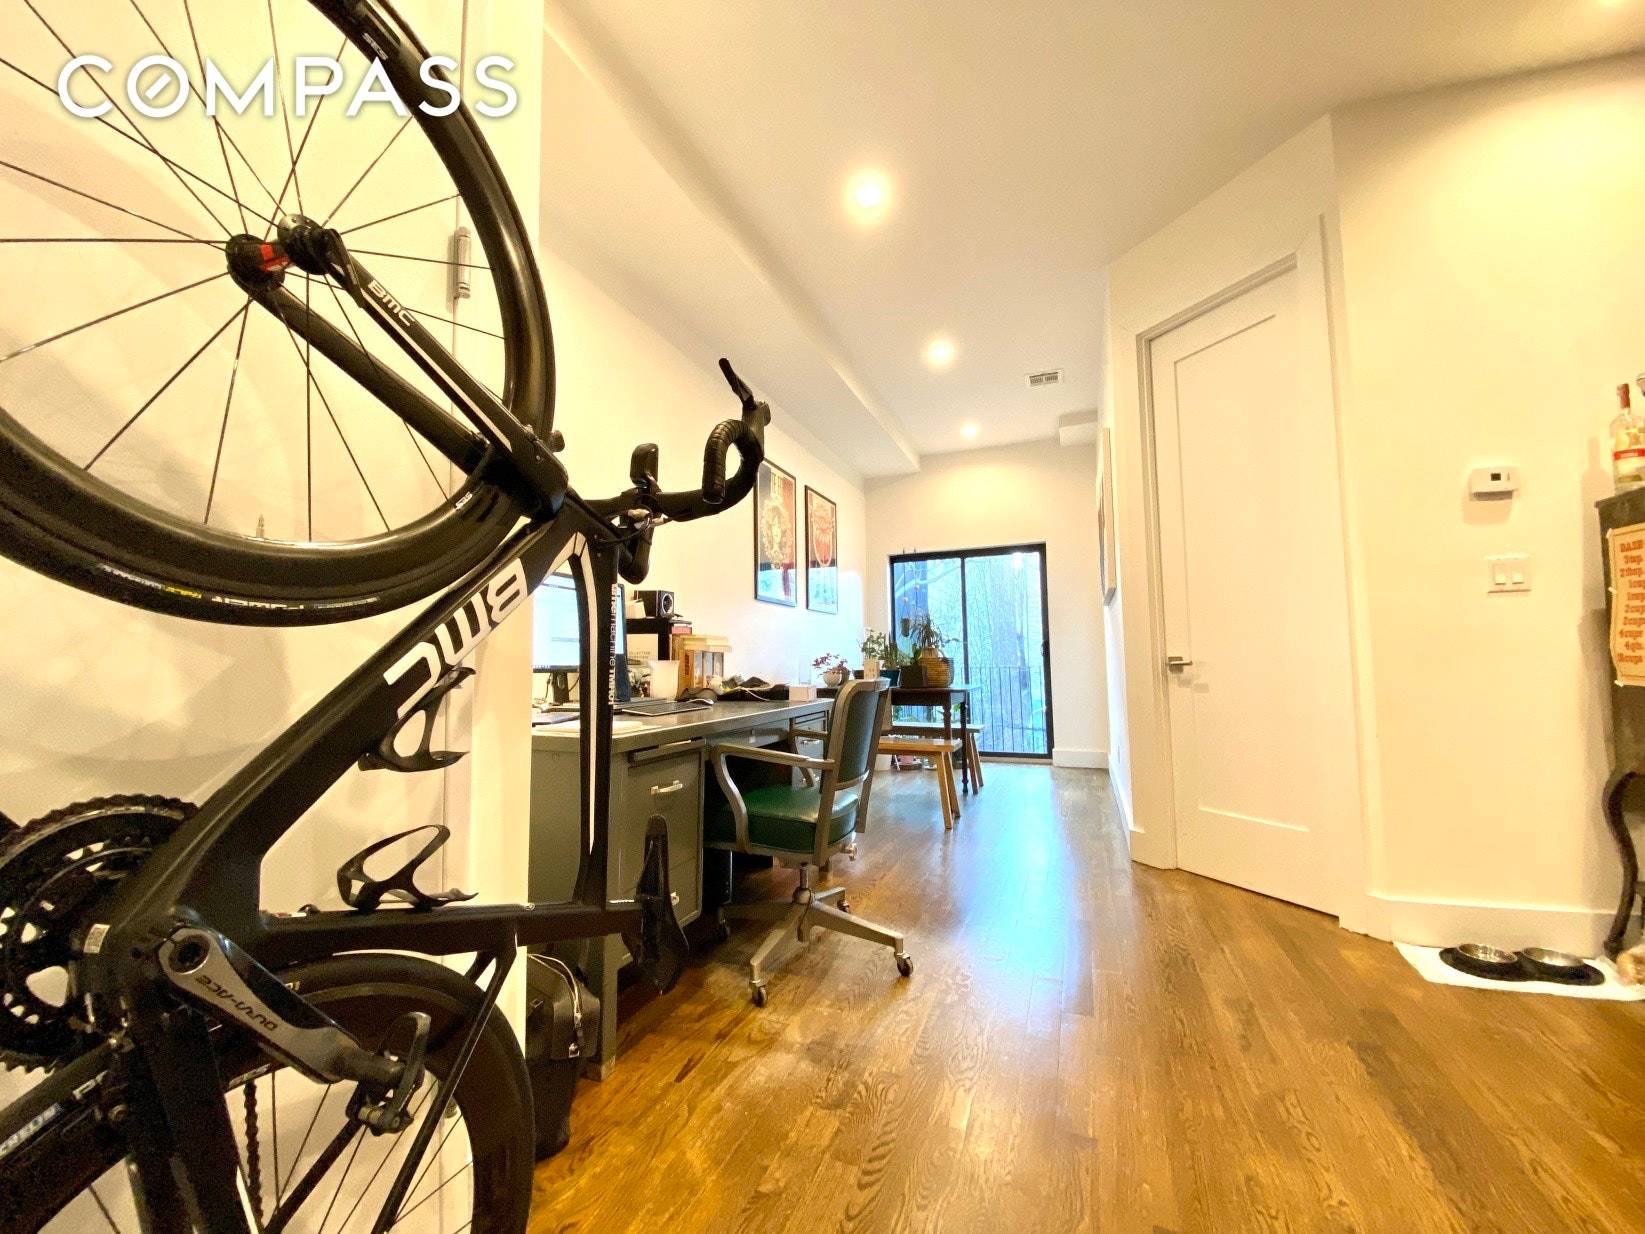 A spacious, beautifully renovated 2 bed, 2 bath home in prime Bushwick !